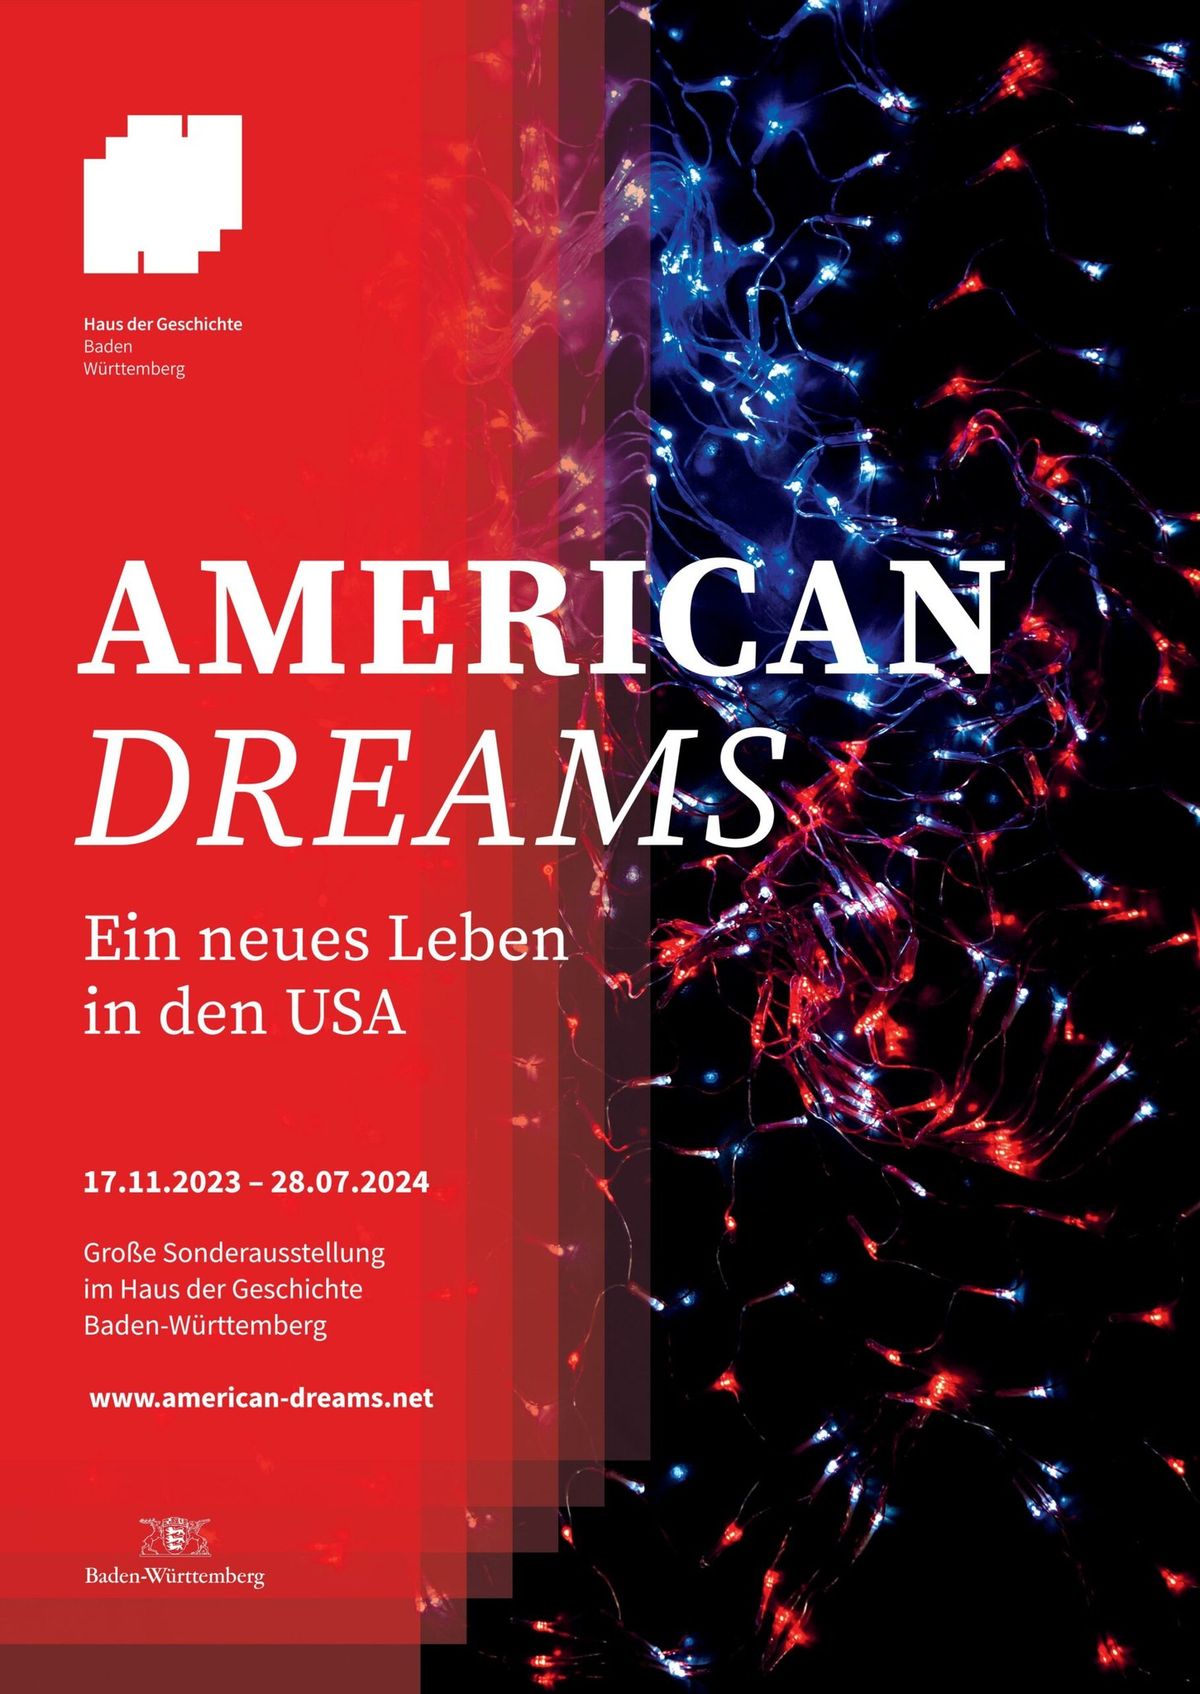 Day Trip to the Special Exhibition "American Dreams: A New Life in the USA" in Stuttgart \t \t \n\n